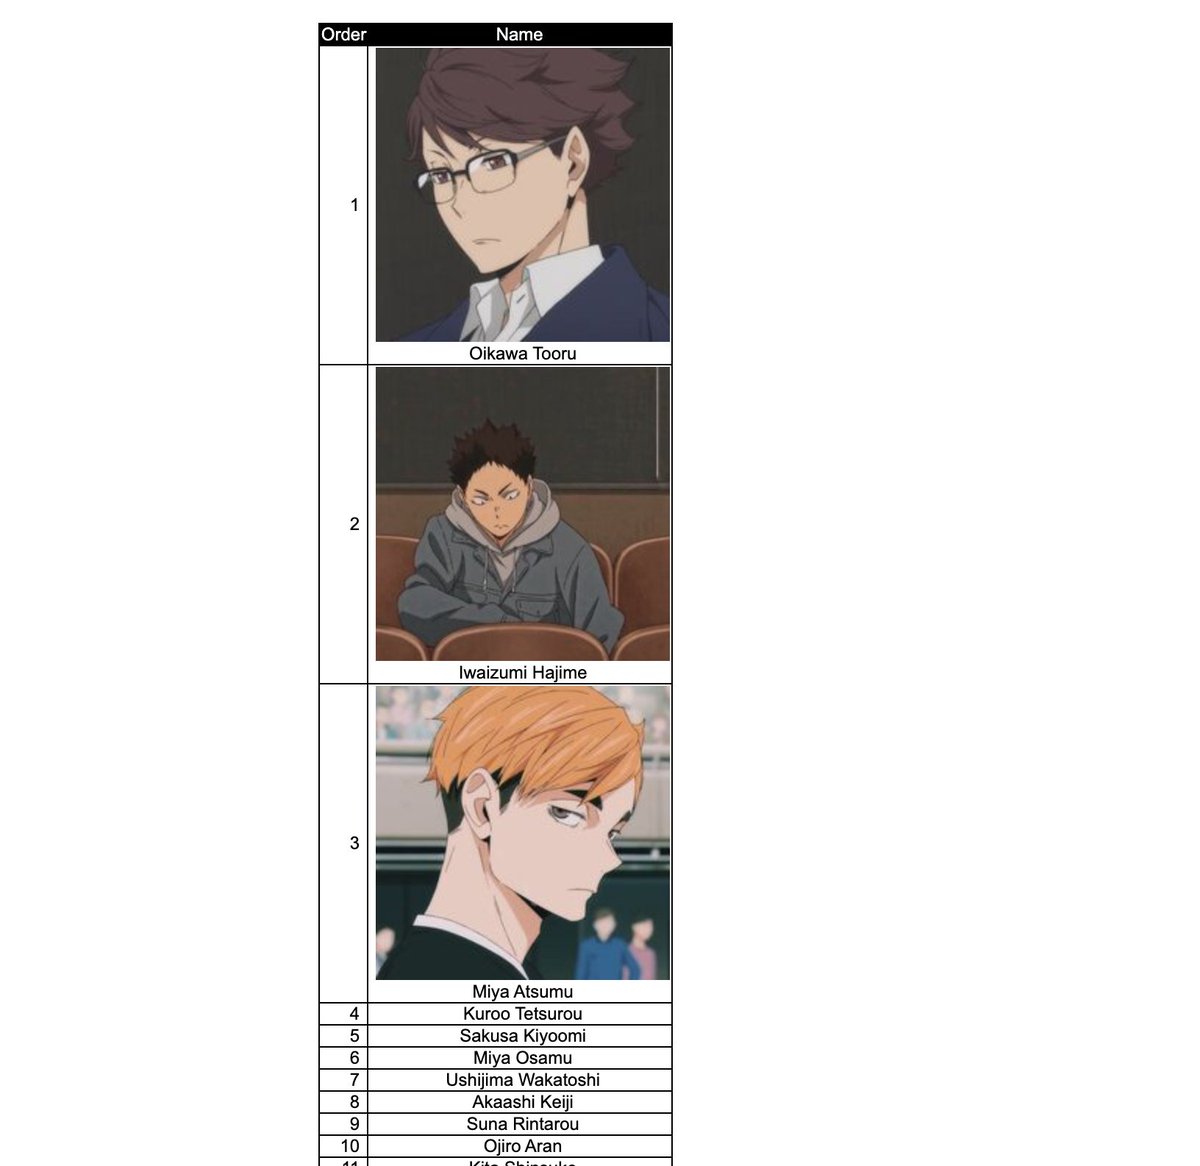 so thats how it is huh... tbh iwa and atsumu swaps a lot depending how i feel but oikawa is always number 1 😌🥰 